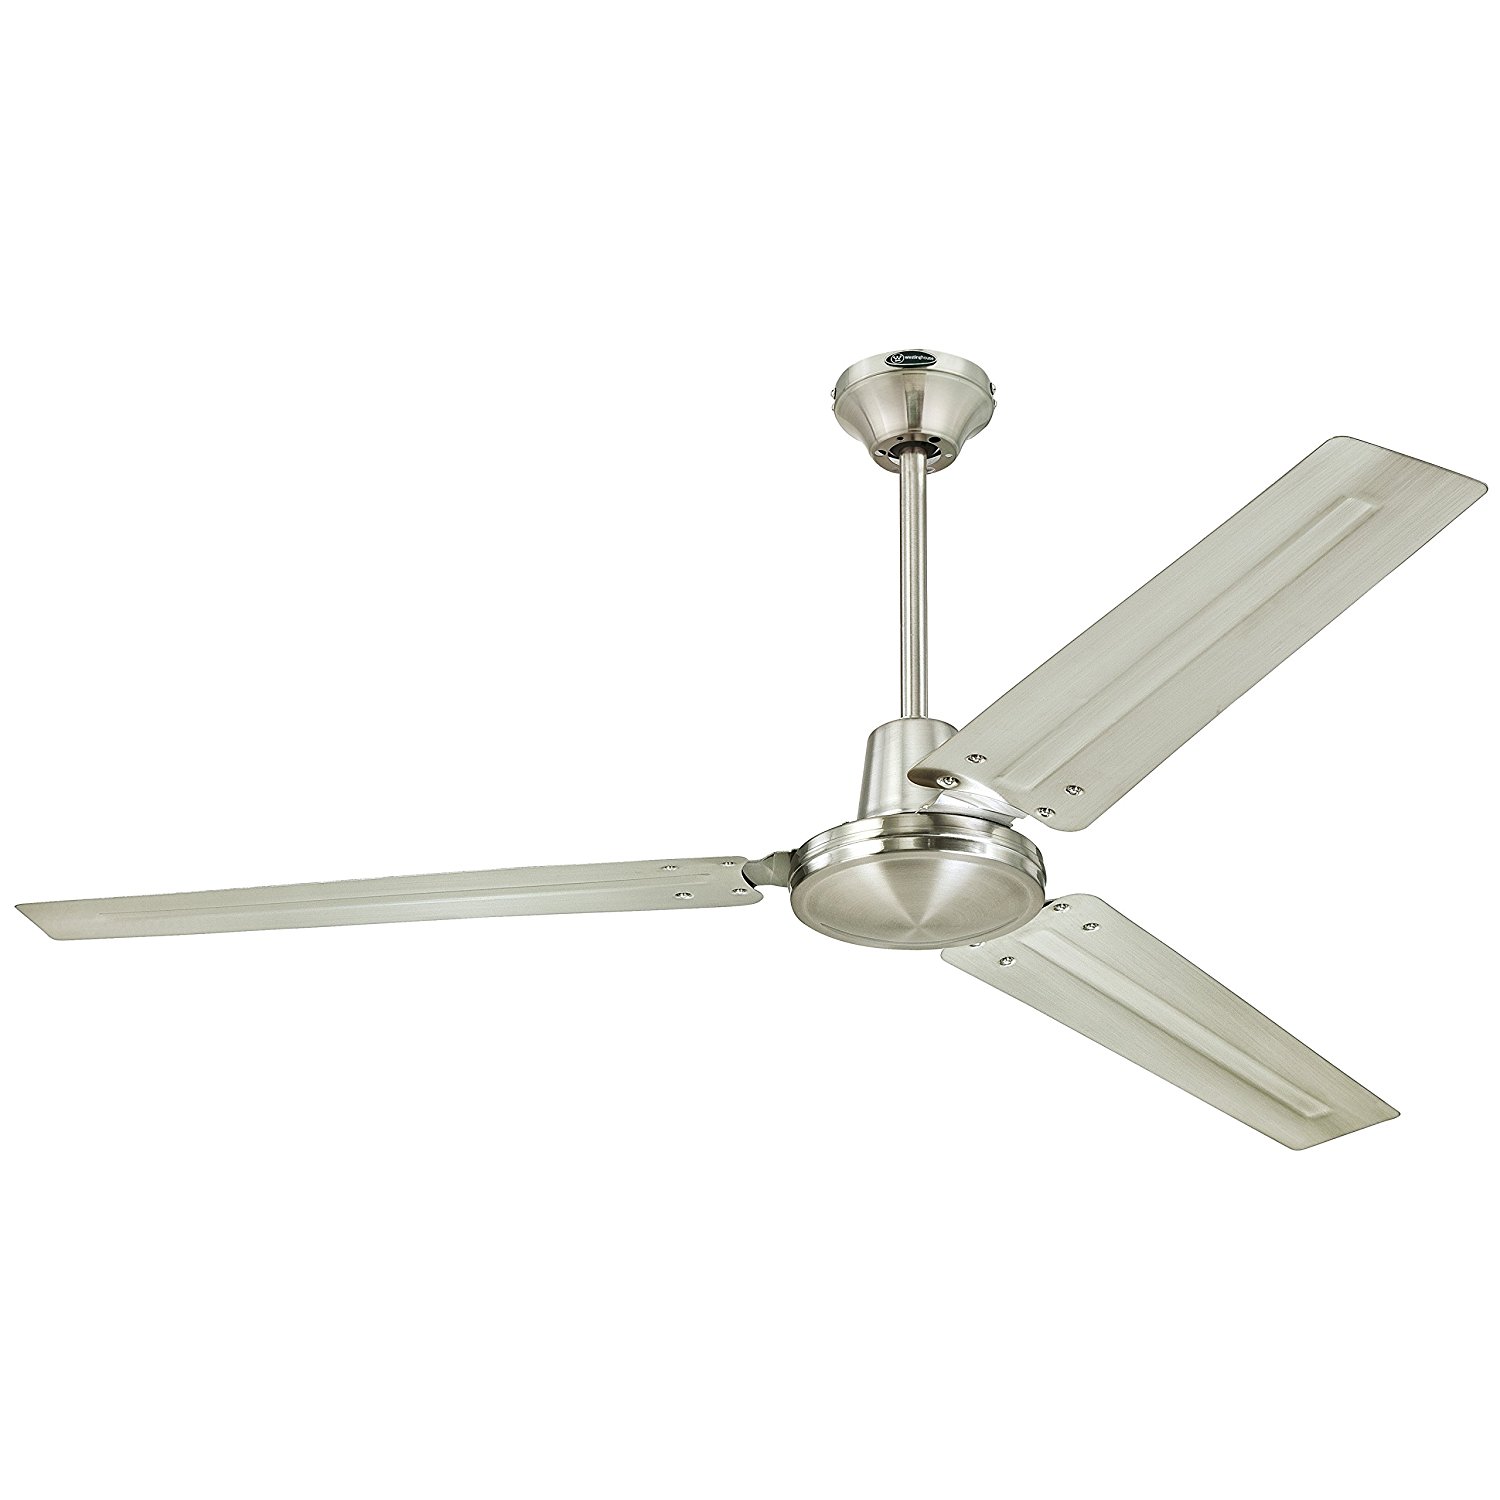 Westinghouse 7861400 Industrial 56-Inch Three-Blade Ceiling Fan with Ball Hanger Installation System, Brushed Nickel